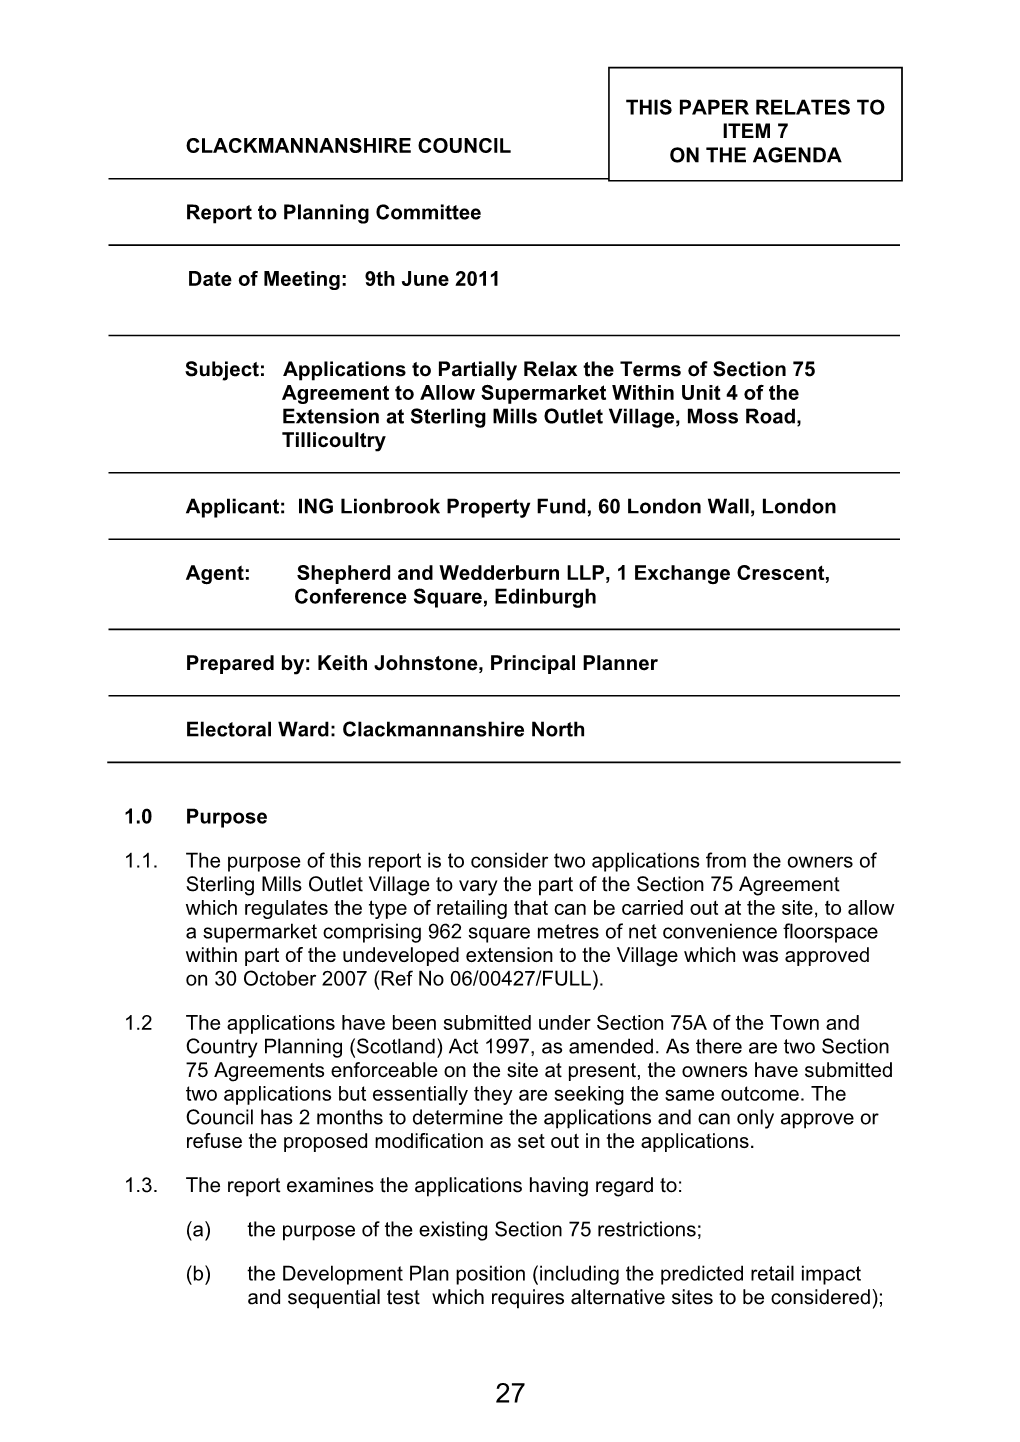 This Paper Relates to Item 7 Clackmannanshire Council on the Agenda